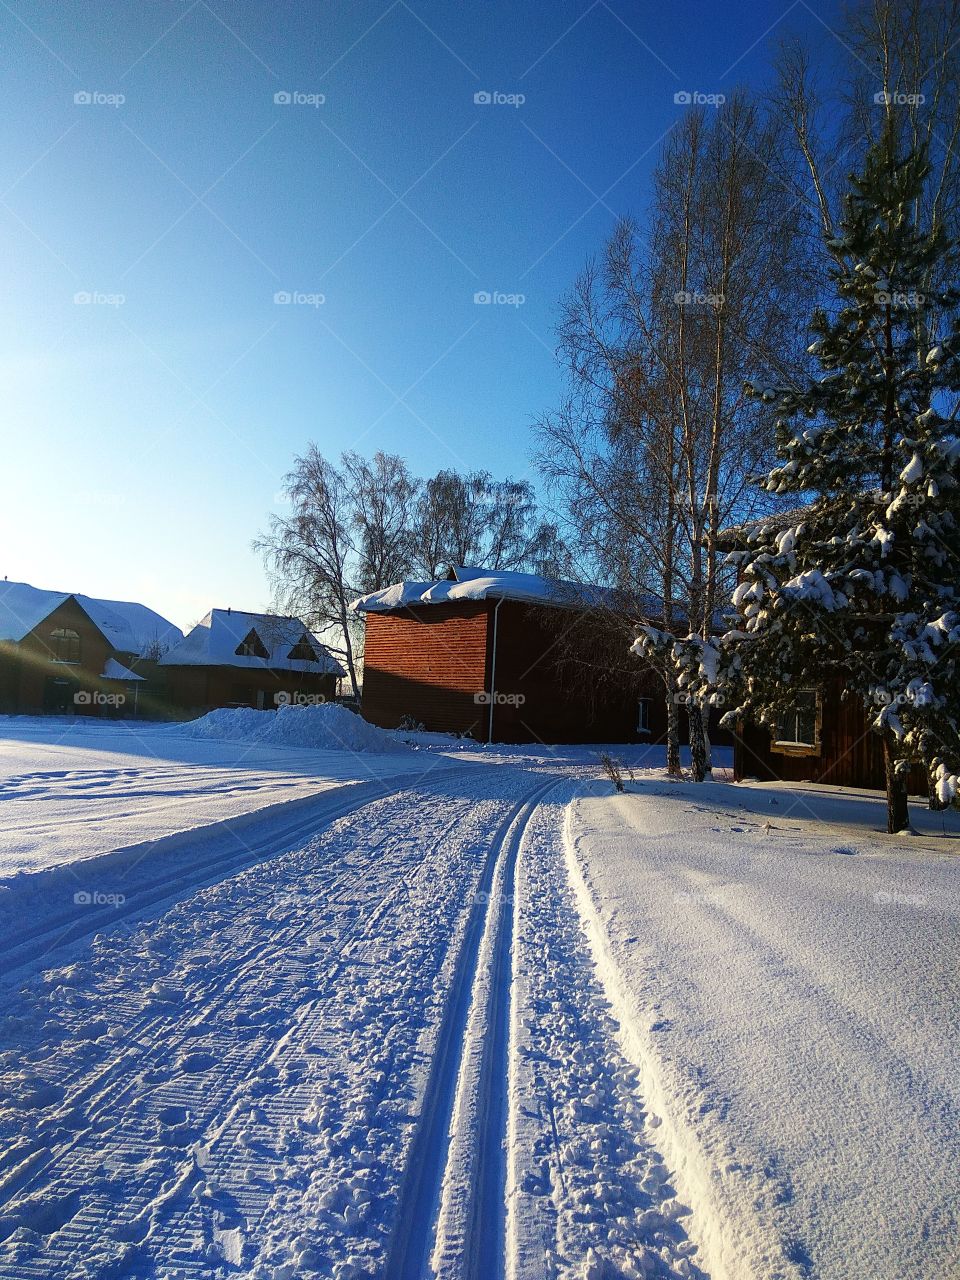 Rural winter landscape with wooden houses and road